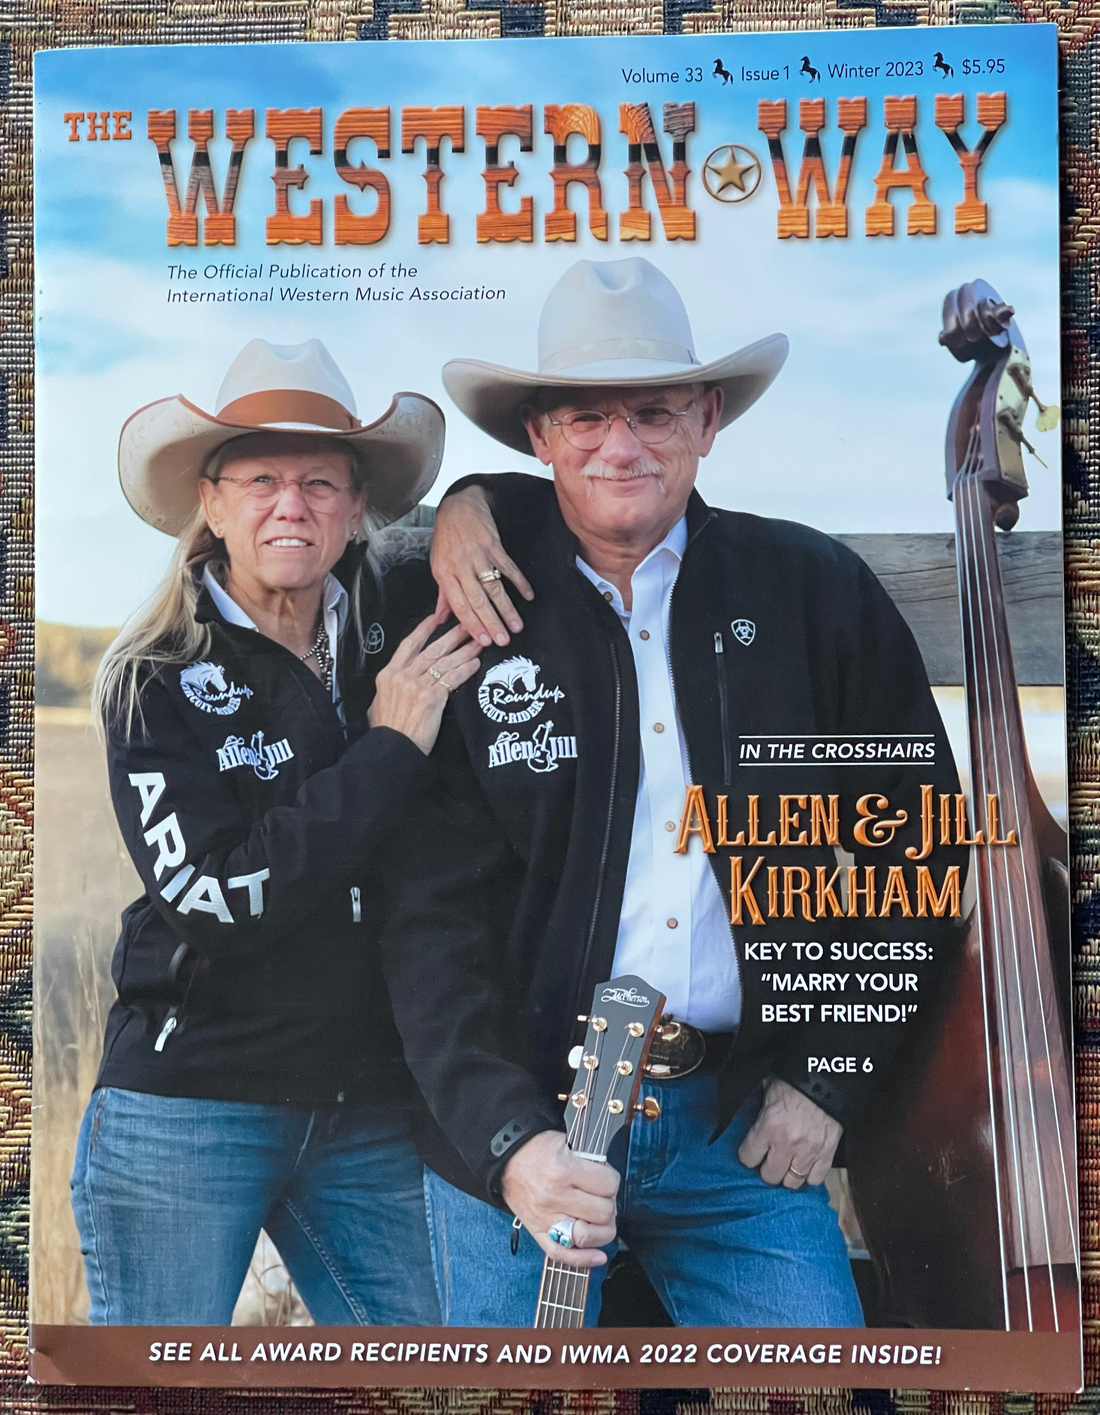 Western Way Magazine "In The Crosshairs" Cover Winter 2023
